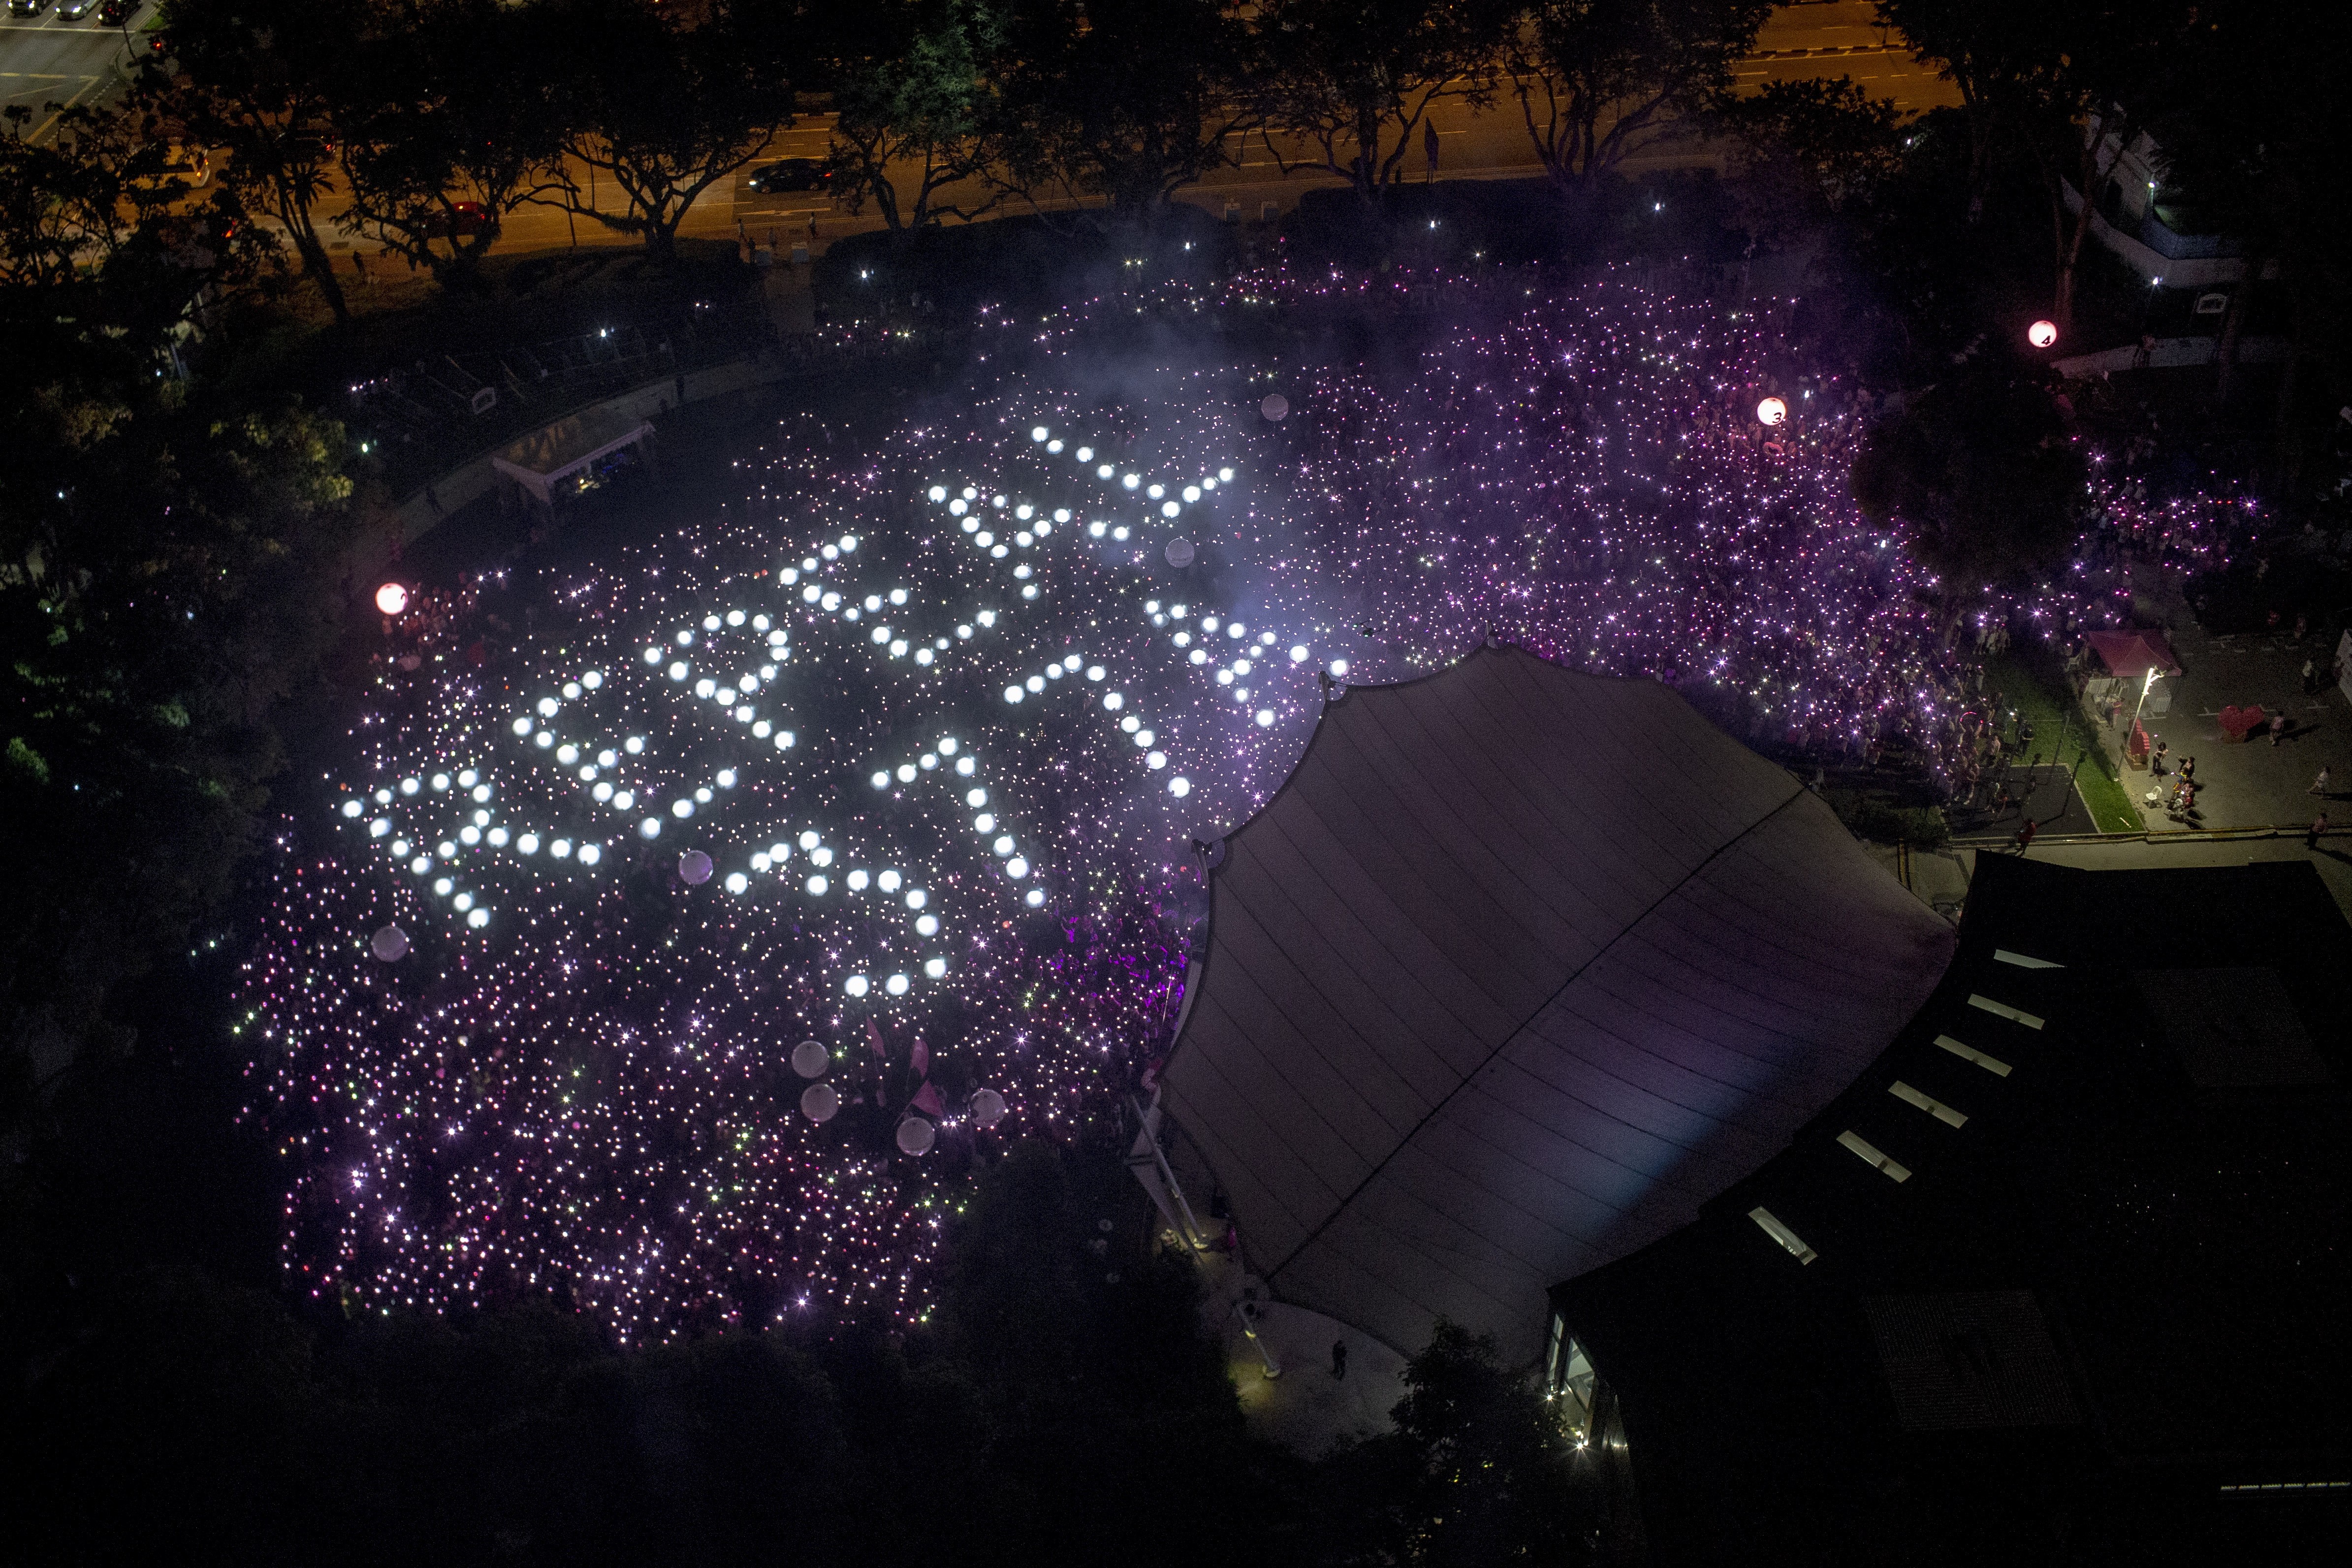 The words “Repeal 377A”, referencing a law that criminalises sexual acts between men, are formed by the crowd during the Pink Dot festival at Speaker's Corner in Hong Lim Park, Singapore, on June 29. Photo: EPA-EFE